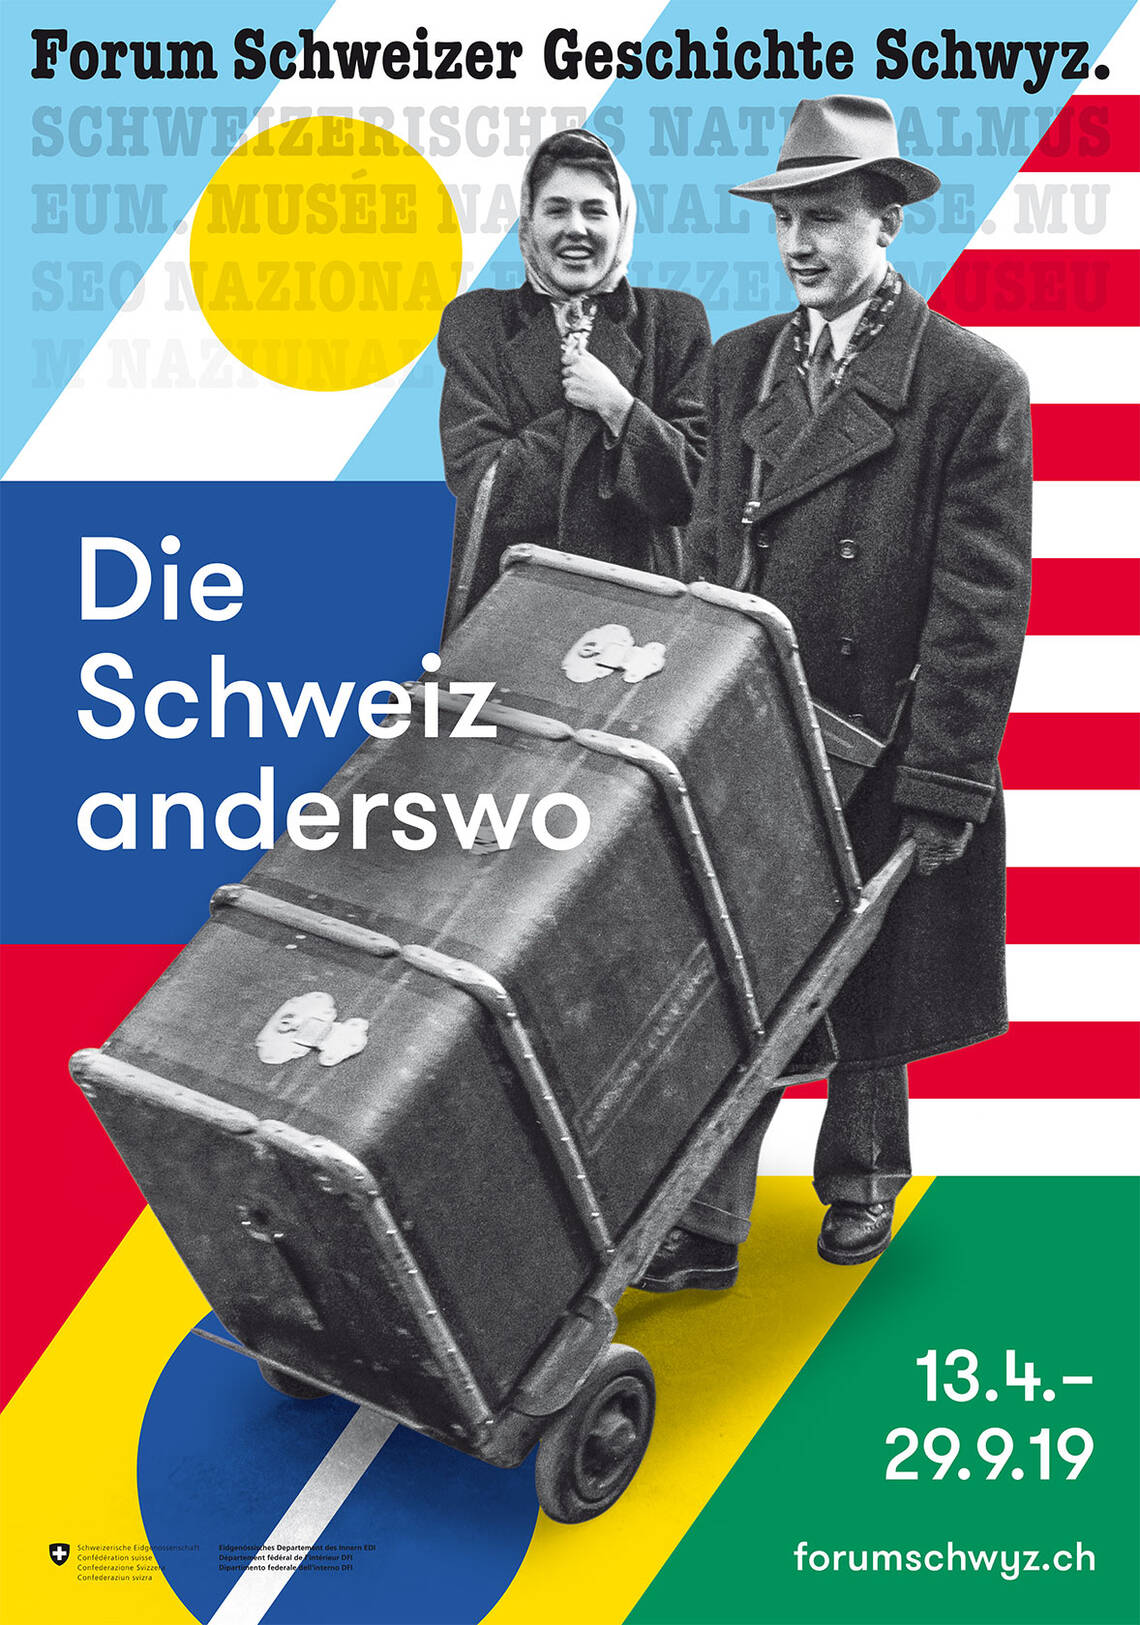 Key visual of the exhibition "Switzerland Elsewhere" - it shows a married couple, the man pushing a large overseas suitcase.